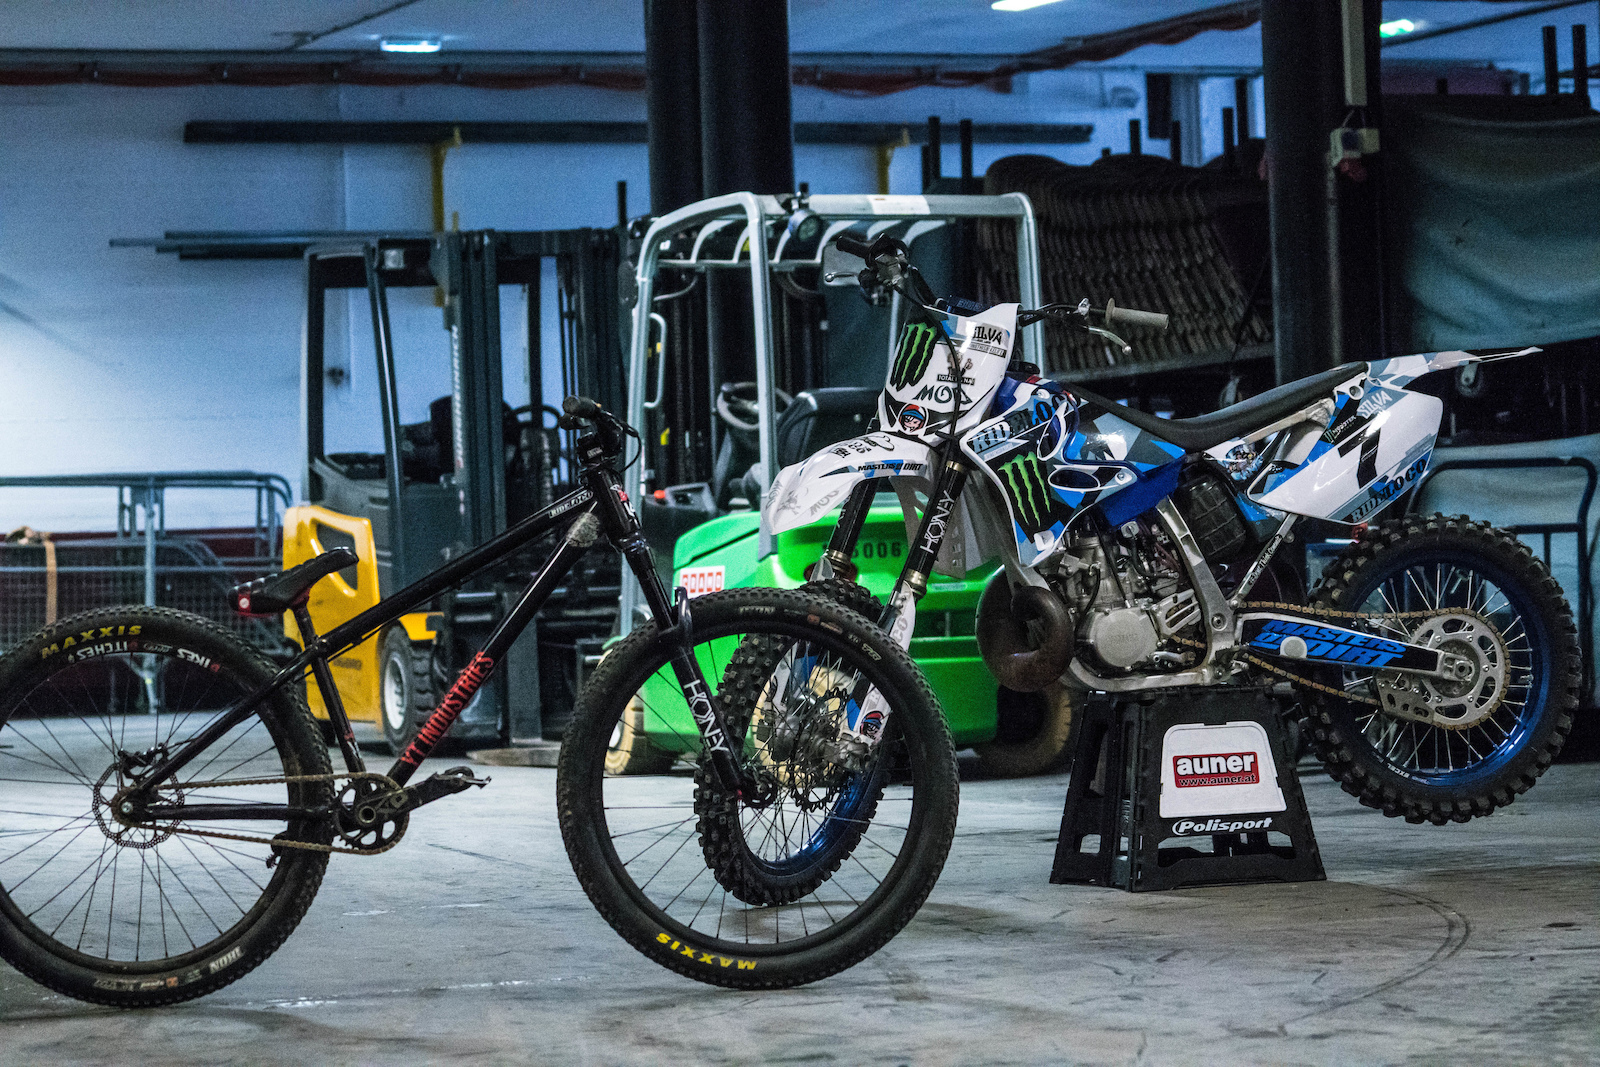 What makes an FMX bike special?